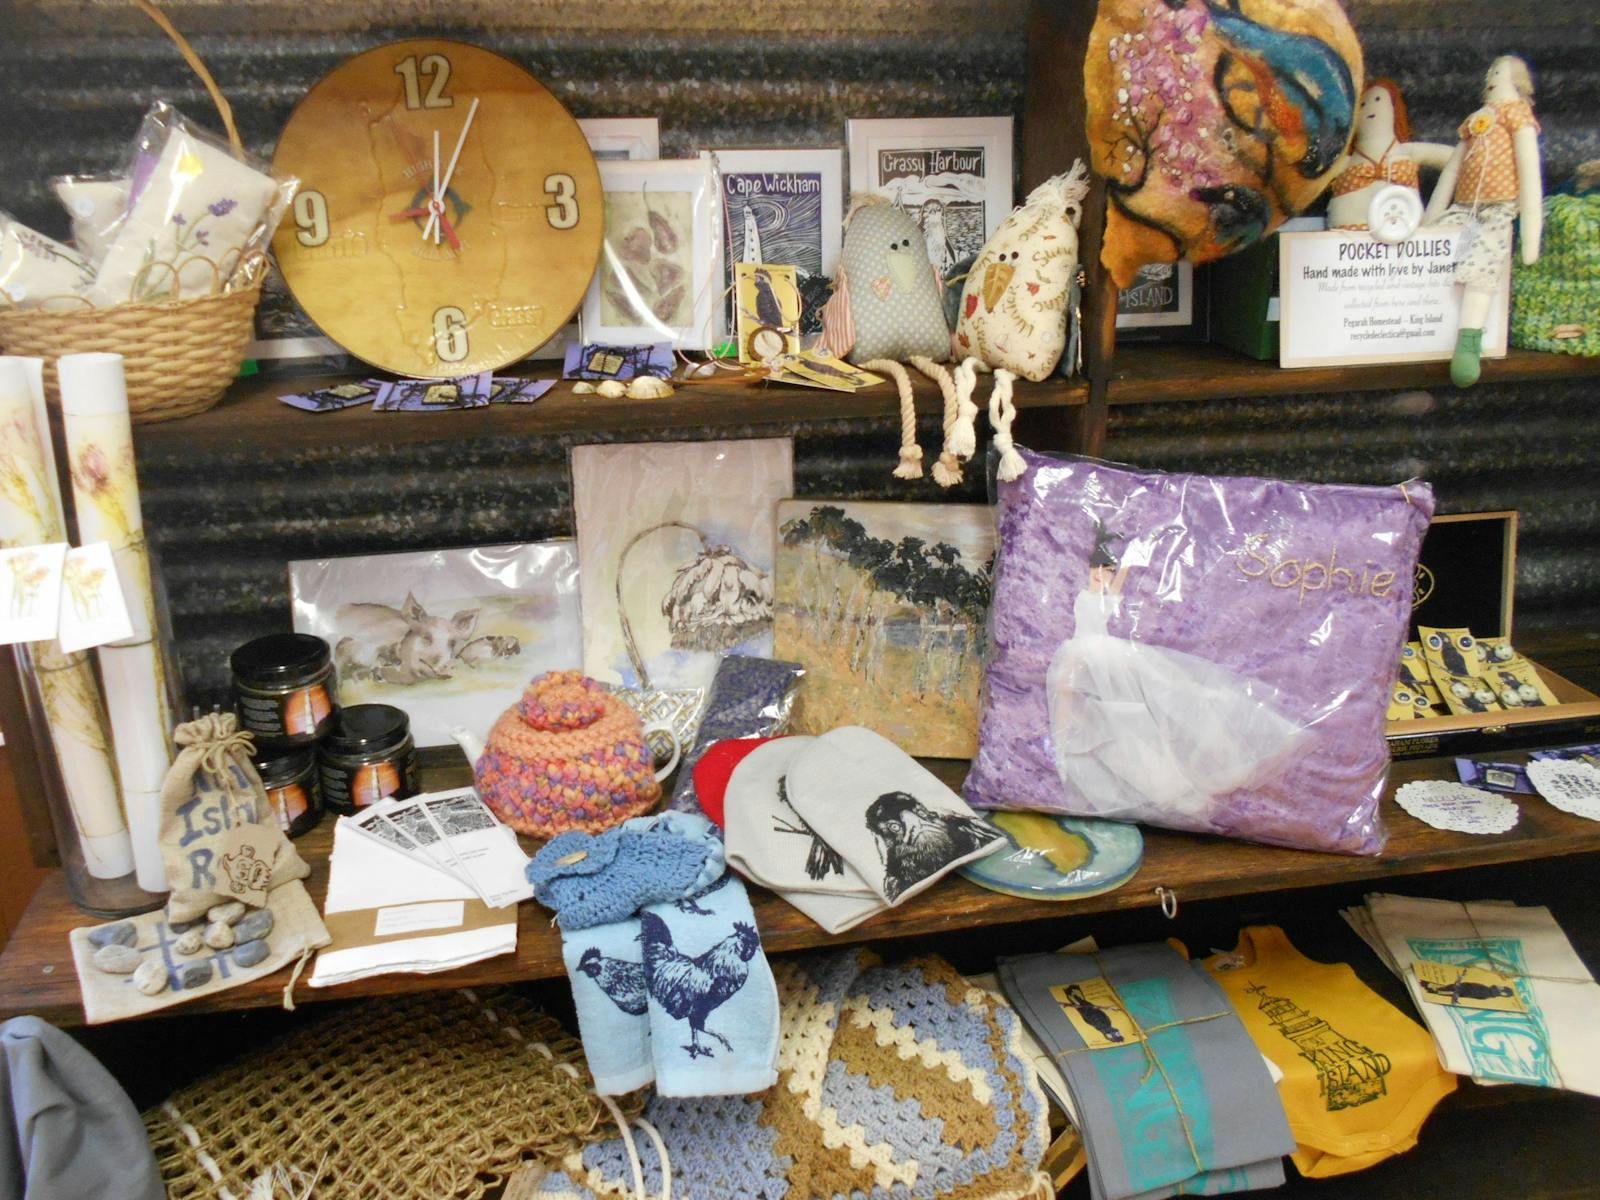 A selection of art and craft items that are available from local artists and makers.